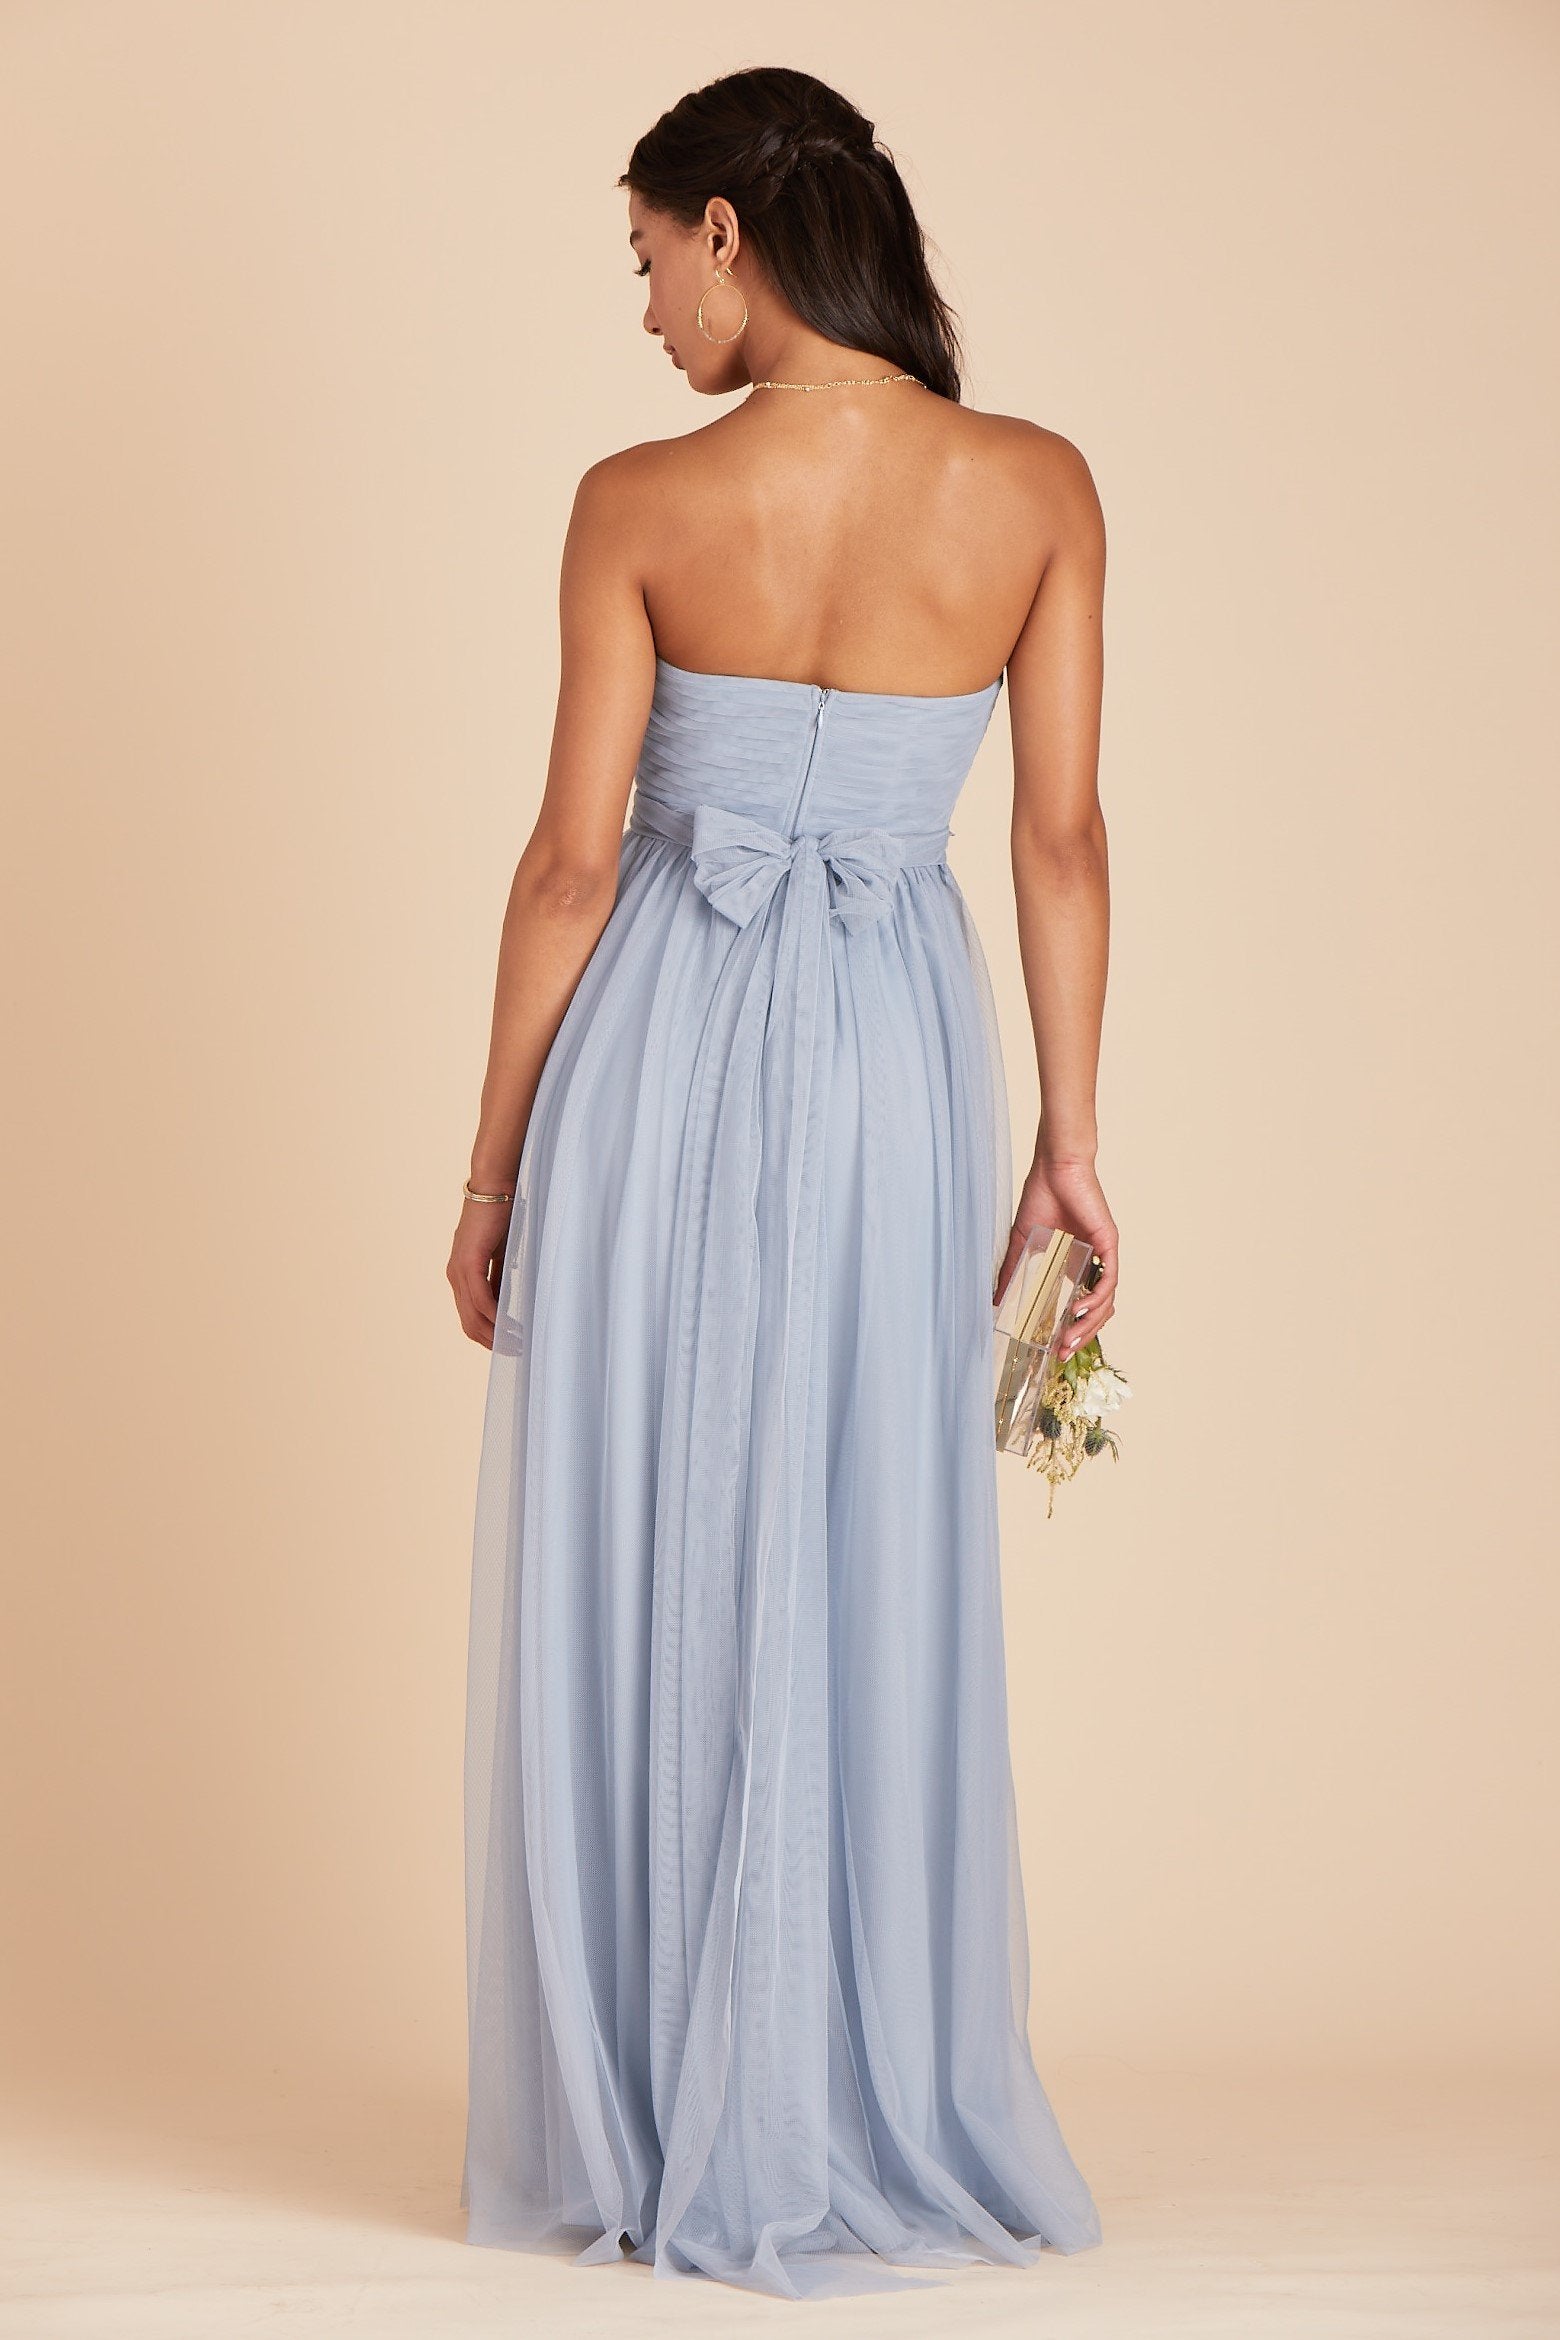 Christina convertible bridesmaid dress in dusty blue tulle by Birdy Grey, back view